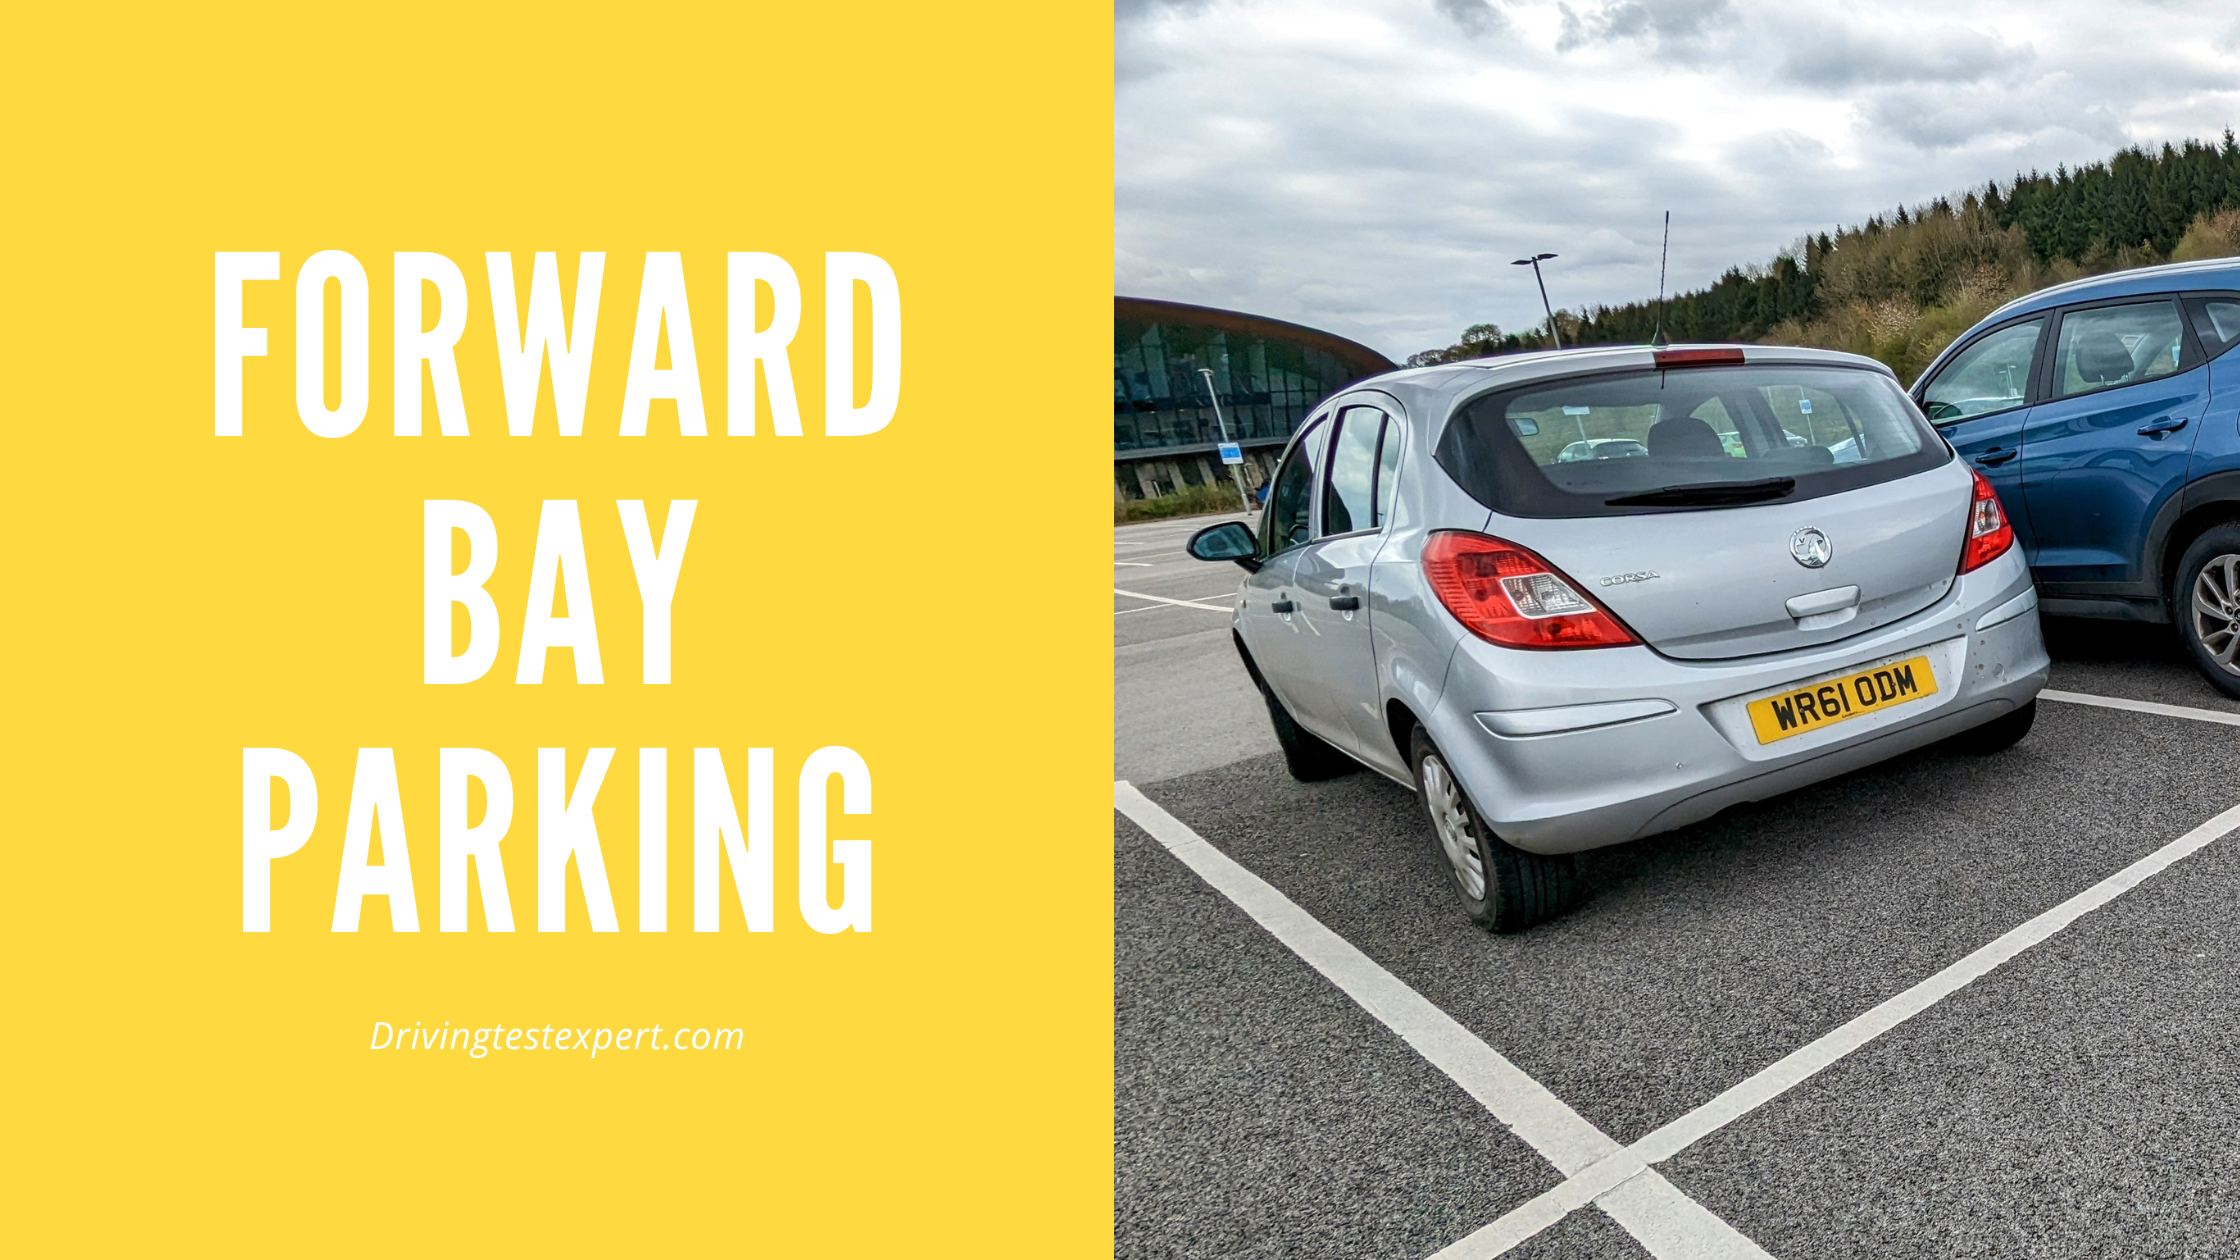 How To Forward Bay Park Your Car: Parking Expert Tips